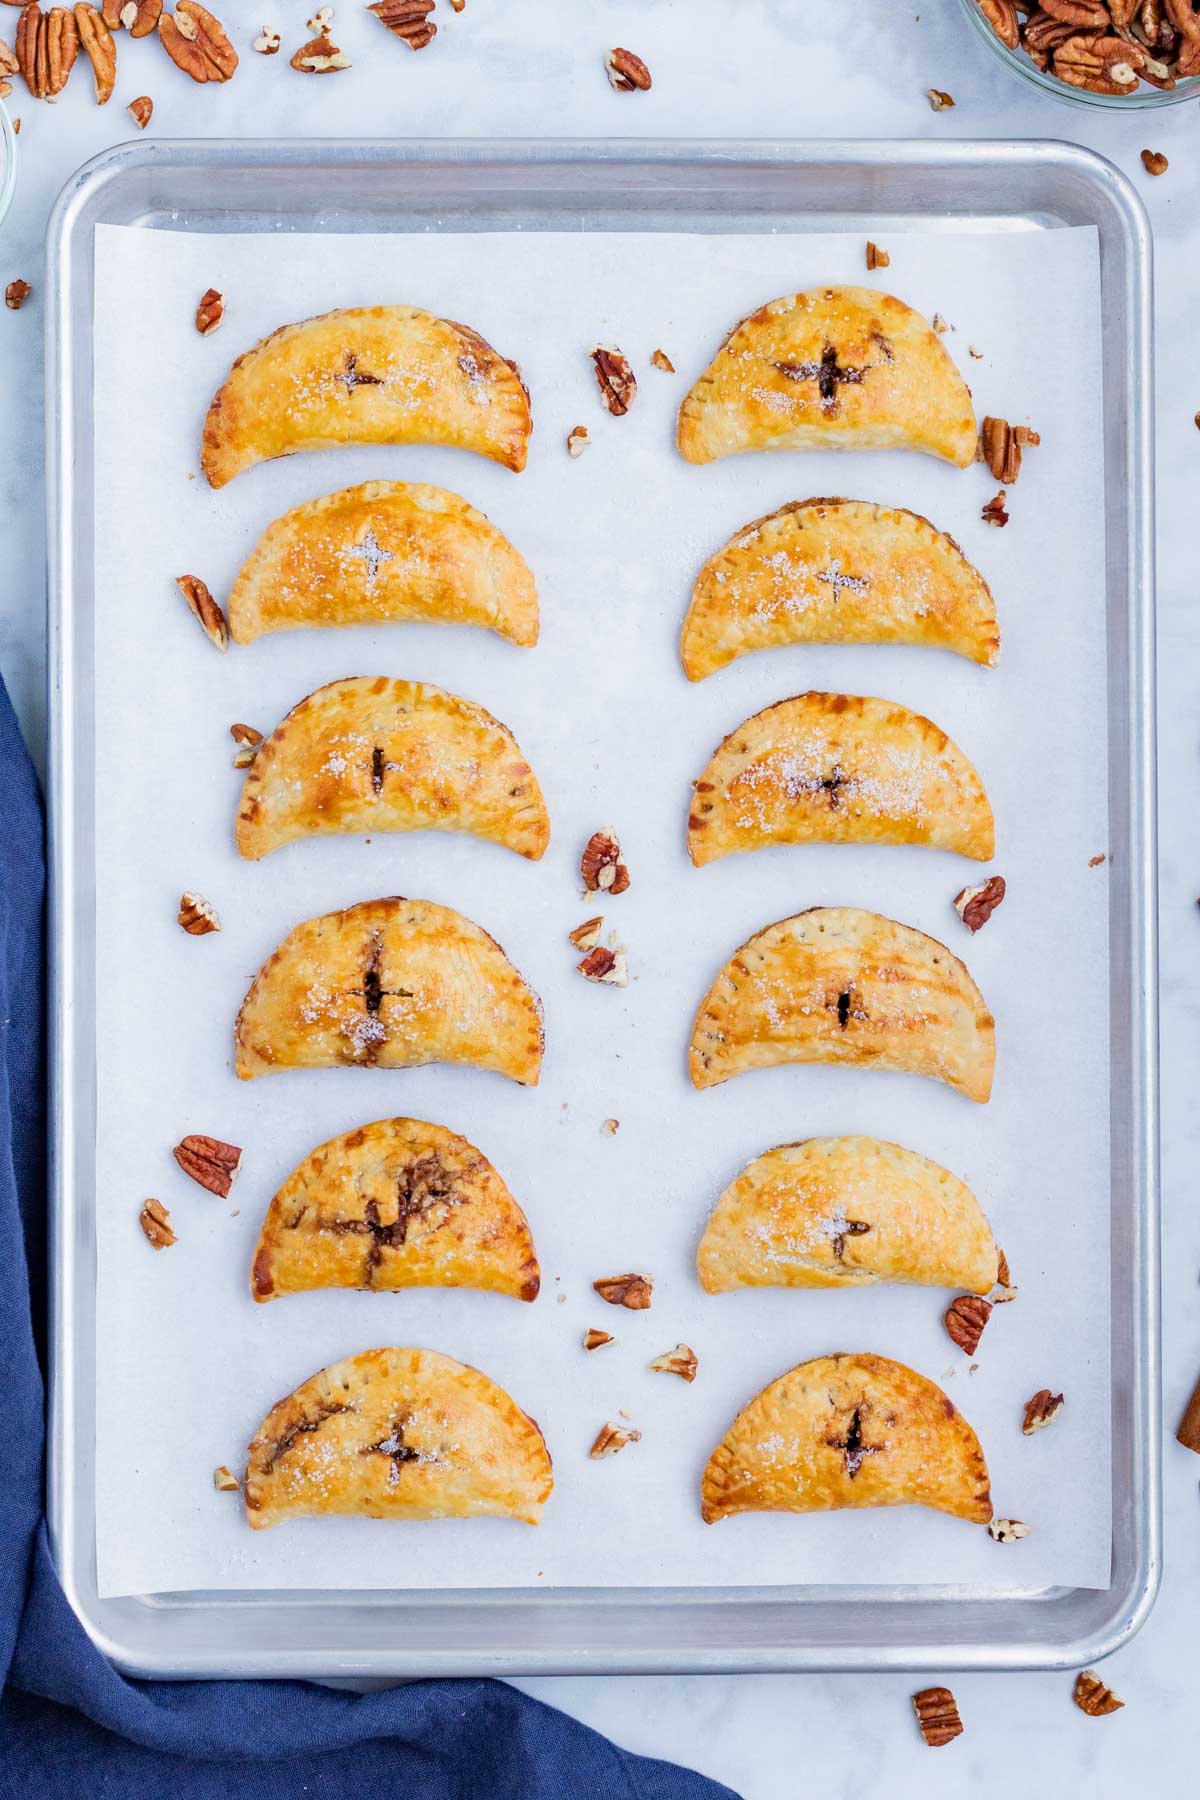 Pecan hand pies are baked until golden in the oven.